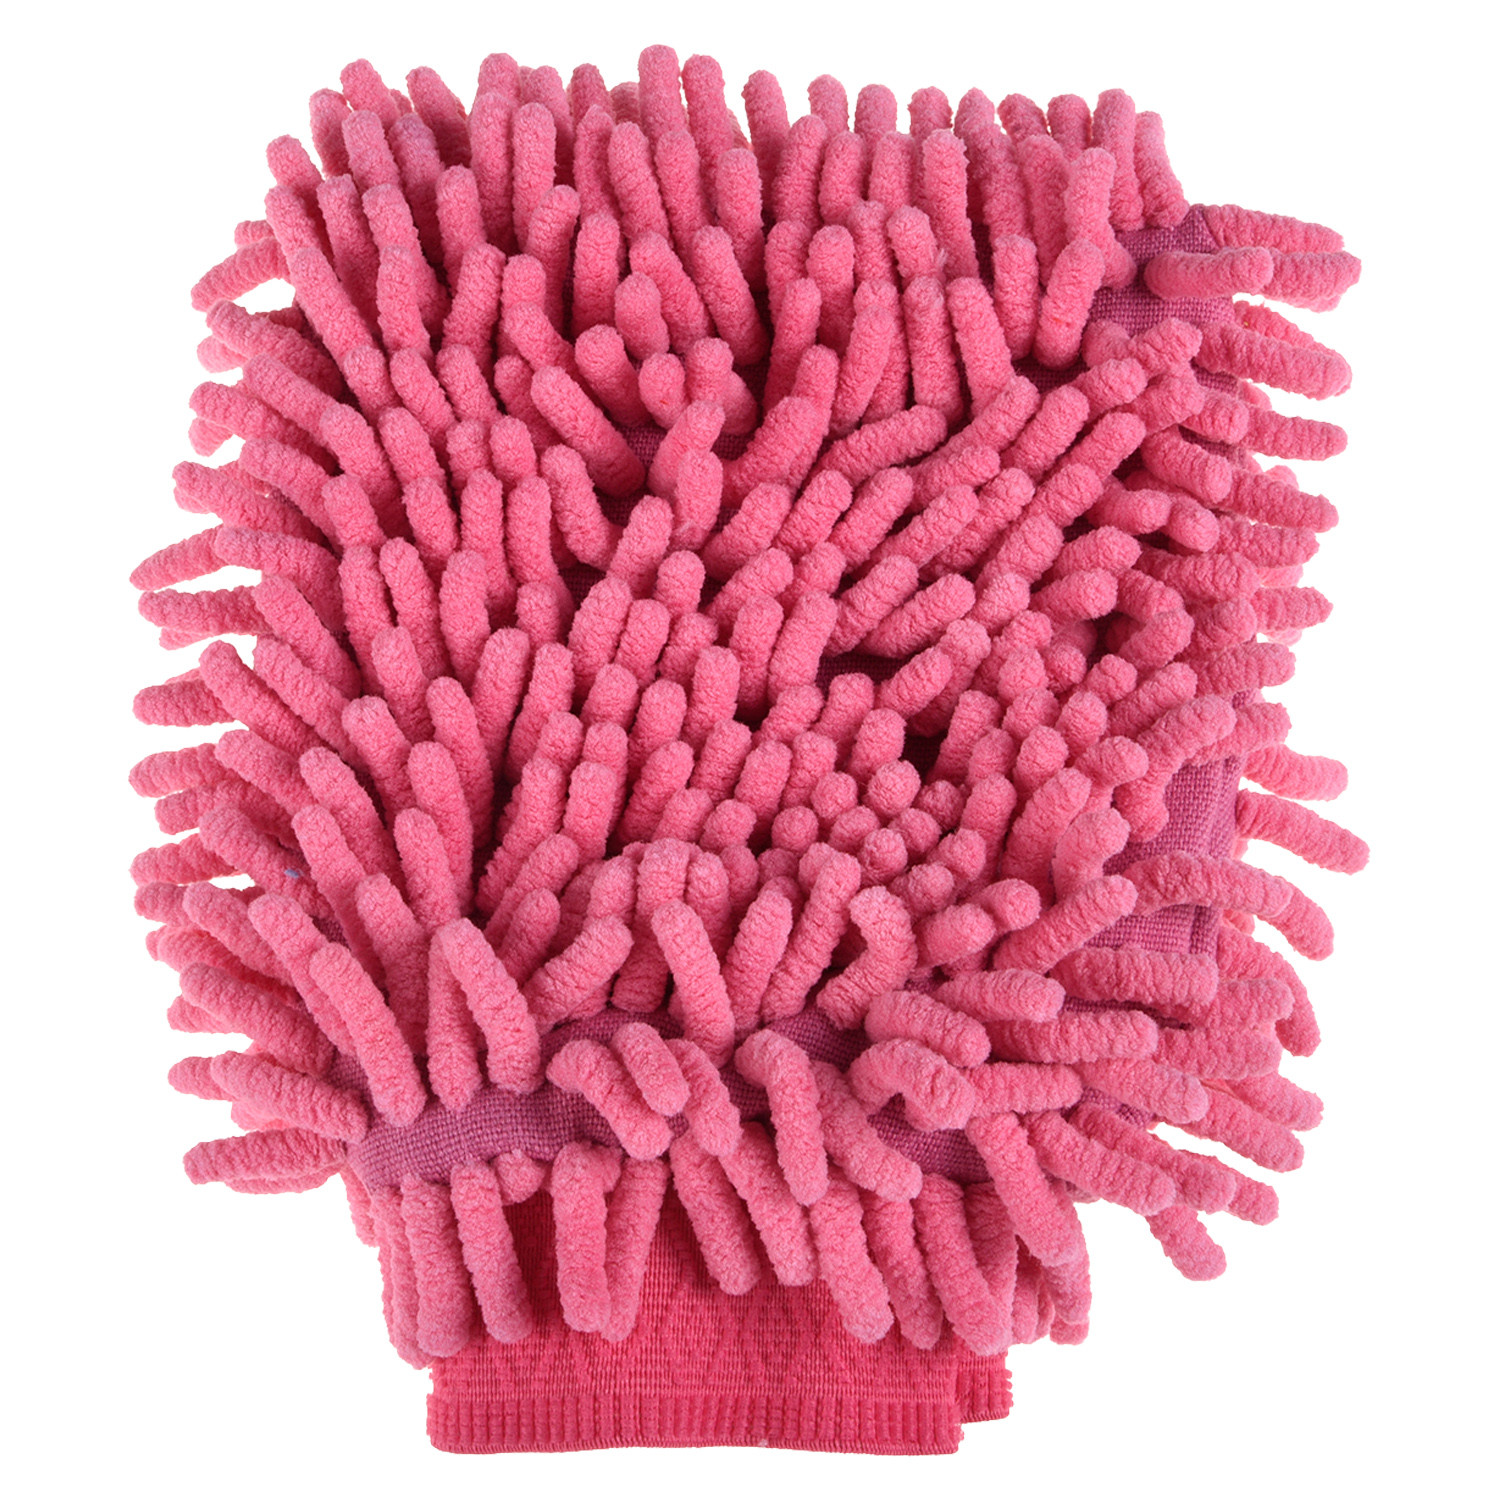 Kuber Industries Chenille Mitts|Microfiber Cleaning Gloves|Inside Waterproof Cloth Gloves|100 Gram Weighted Hand Duster|Hand Chenille Gloves For Car|Glass (Pink)